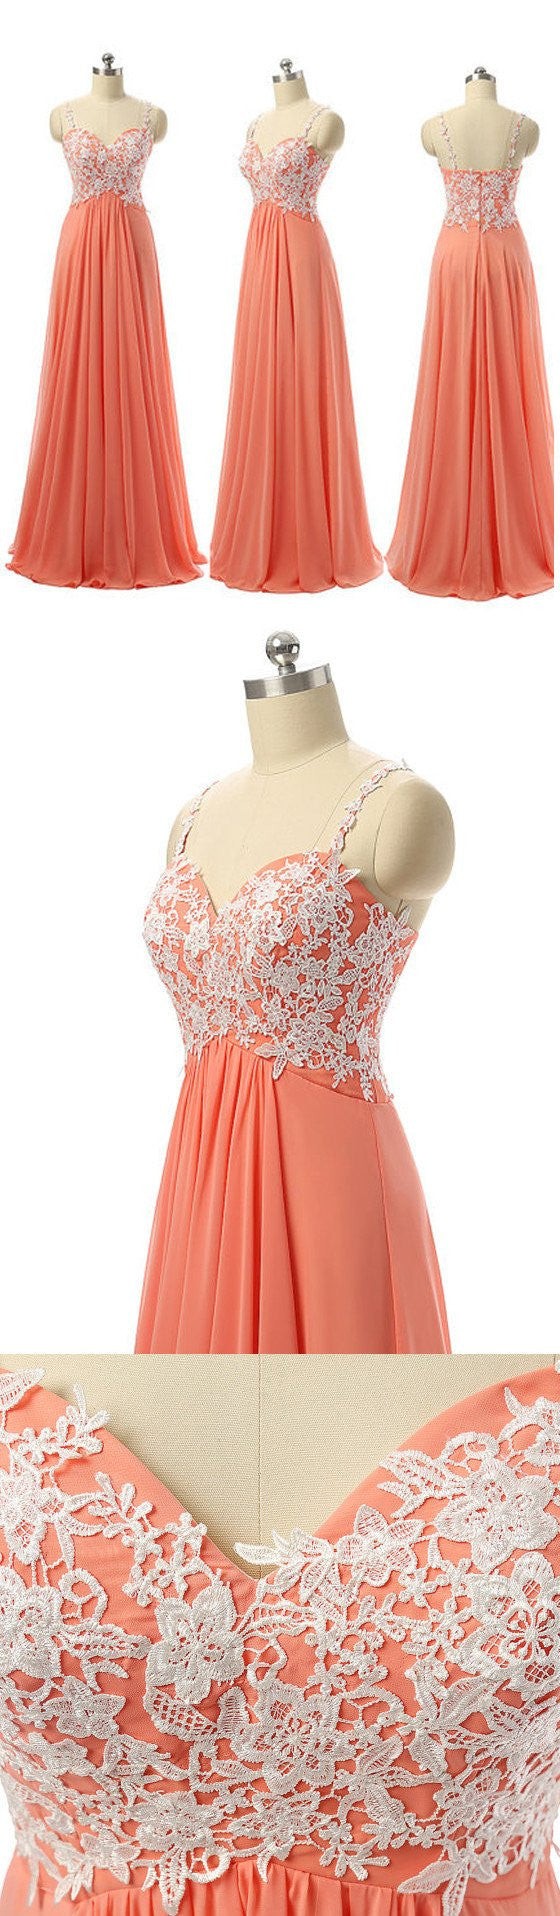 Coral Bridesmaid Dresses,Lace Top Bridesmaid Dresses,Neutral Bridesmaid Dress, Long Bridesmaid Dress,Fs026-Dolly Gown